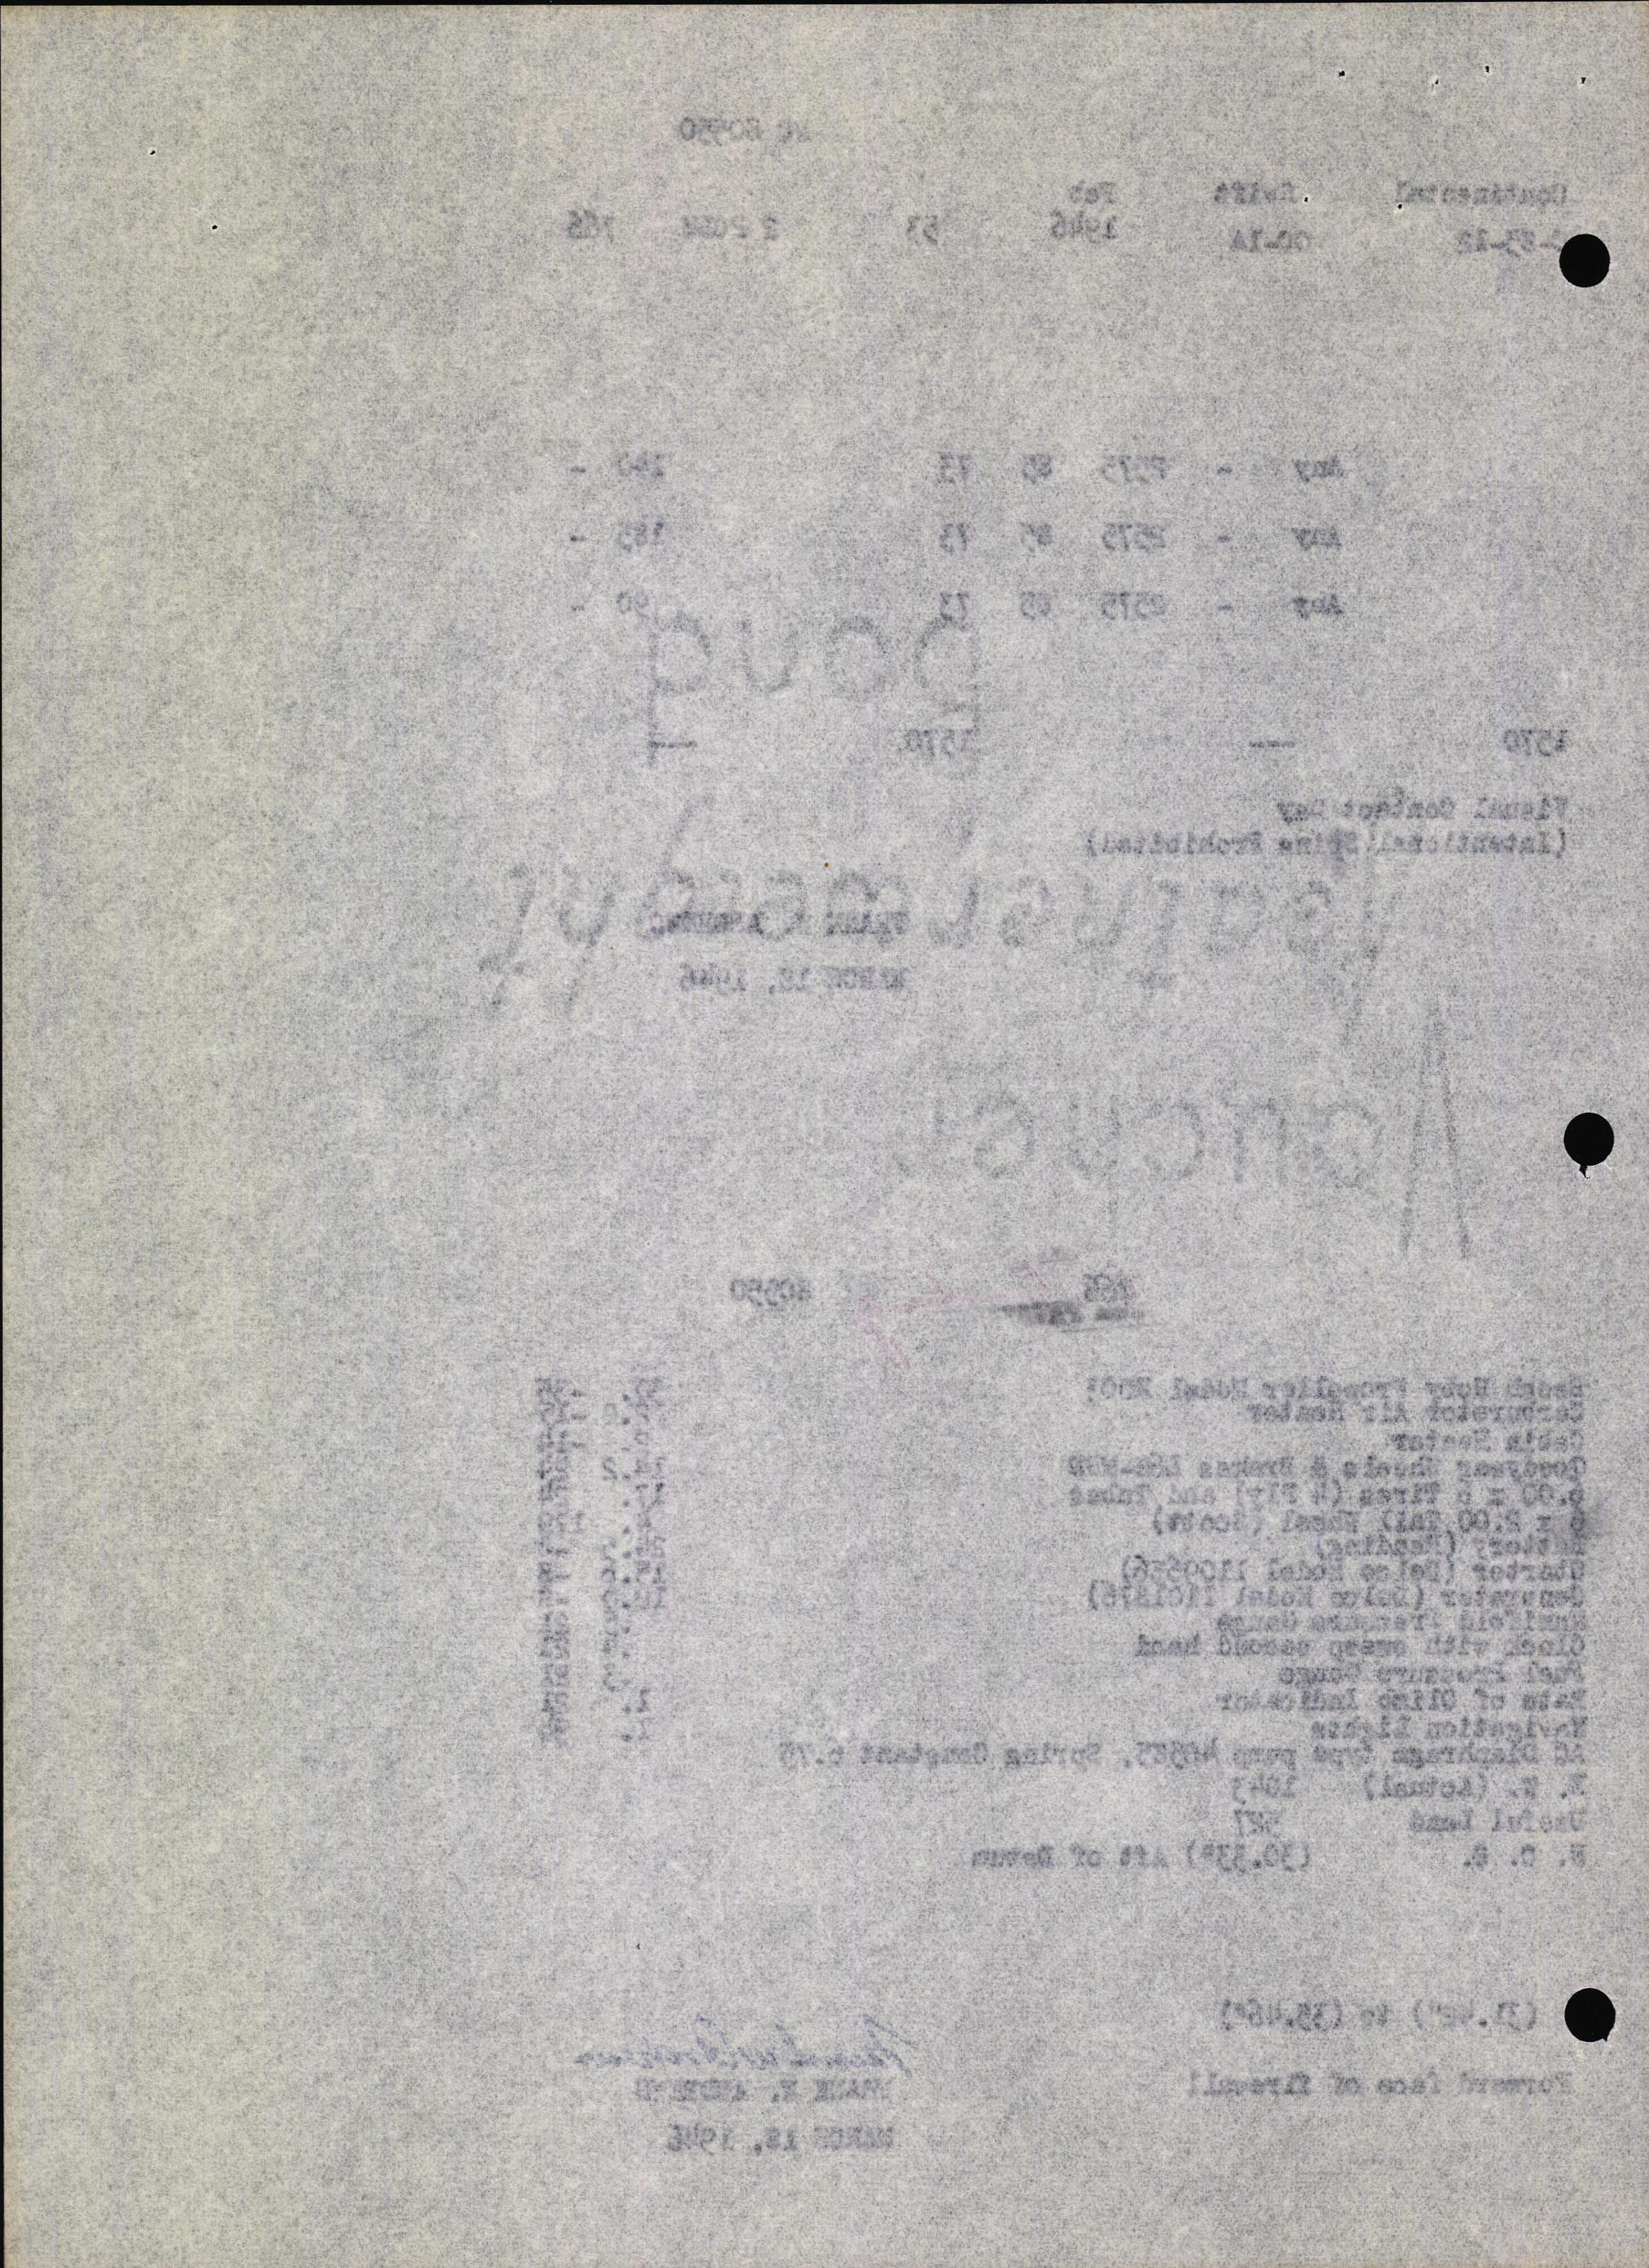 Sample page 8 from AirCorps Library document: Technical Information for Serial Number 53